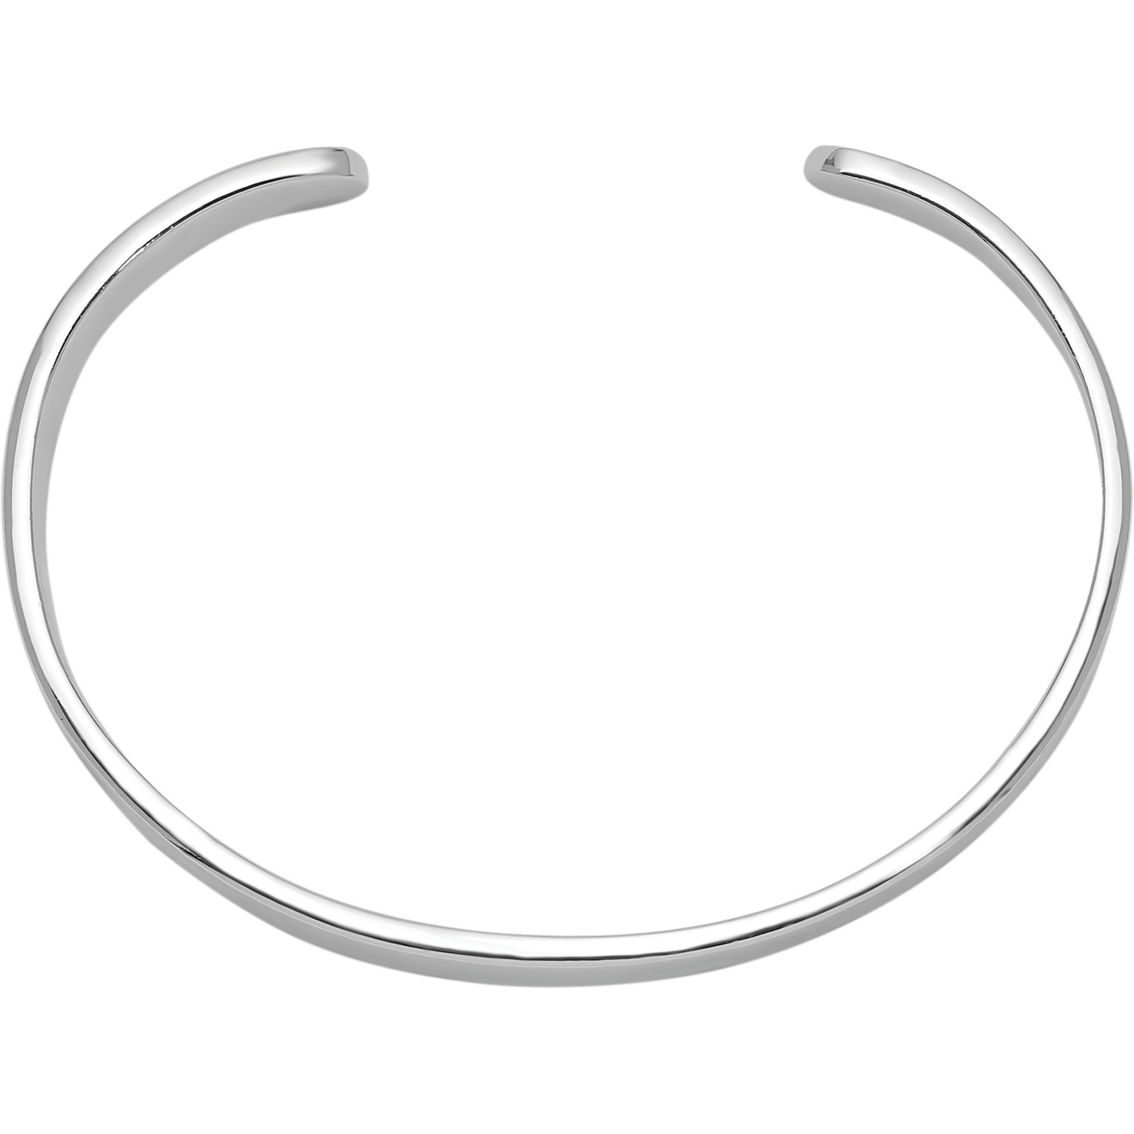 Kids Rhodium Over Sterling Silver Polished Cuff Bangle Bracelet, 4.5 in. - Image 2 of 3